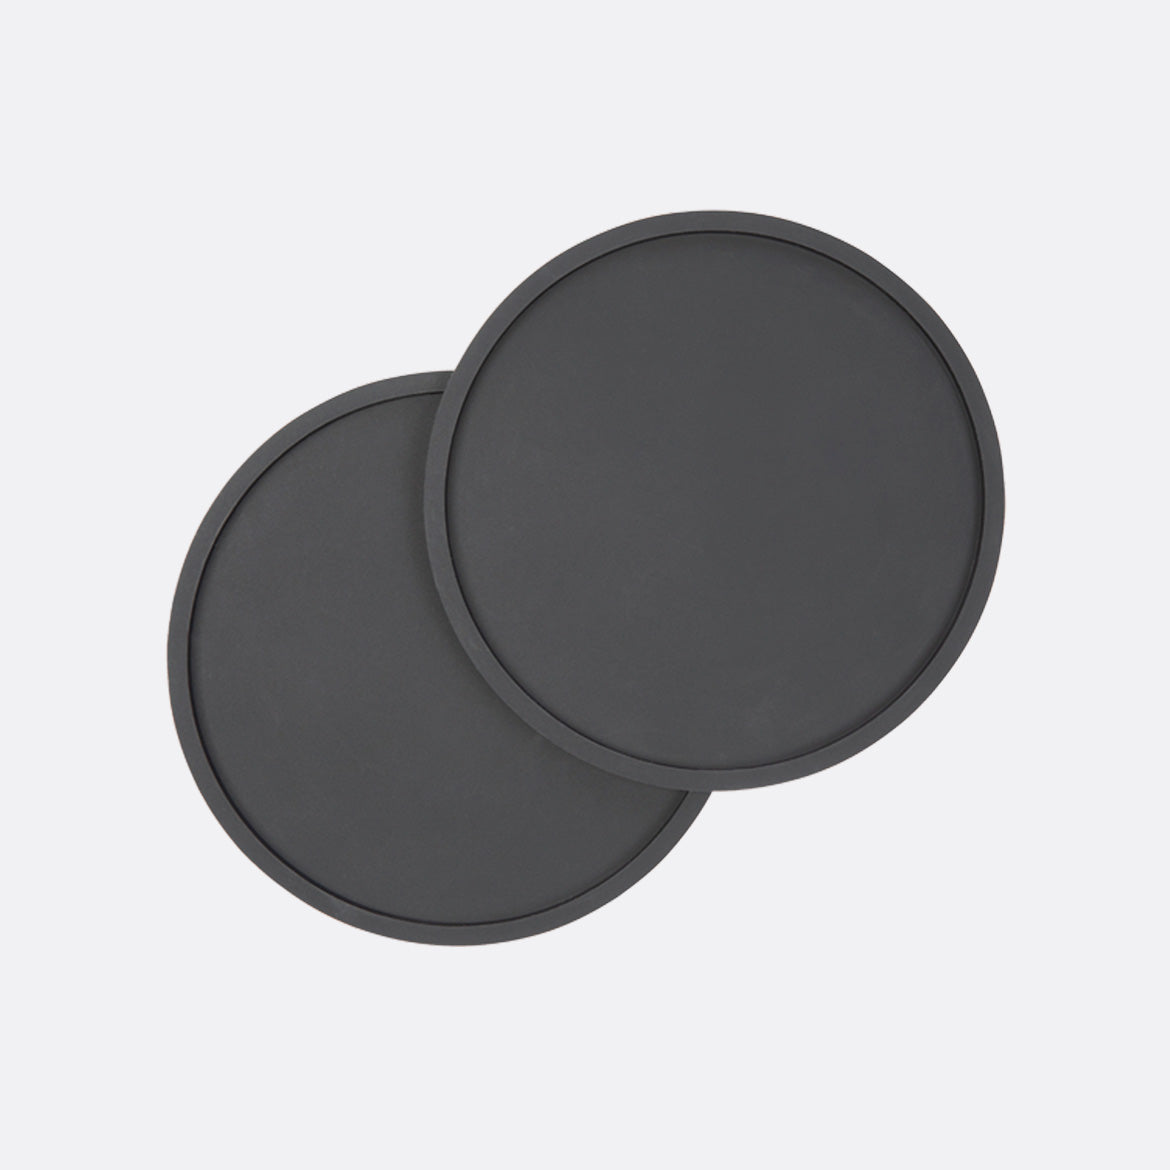 ORE Pet Silicone Placemat in Dark Grey